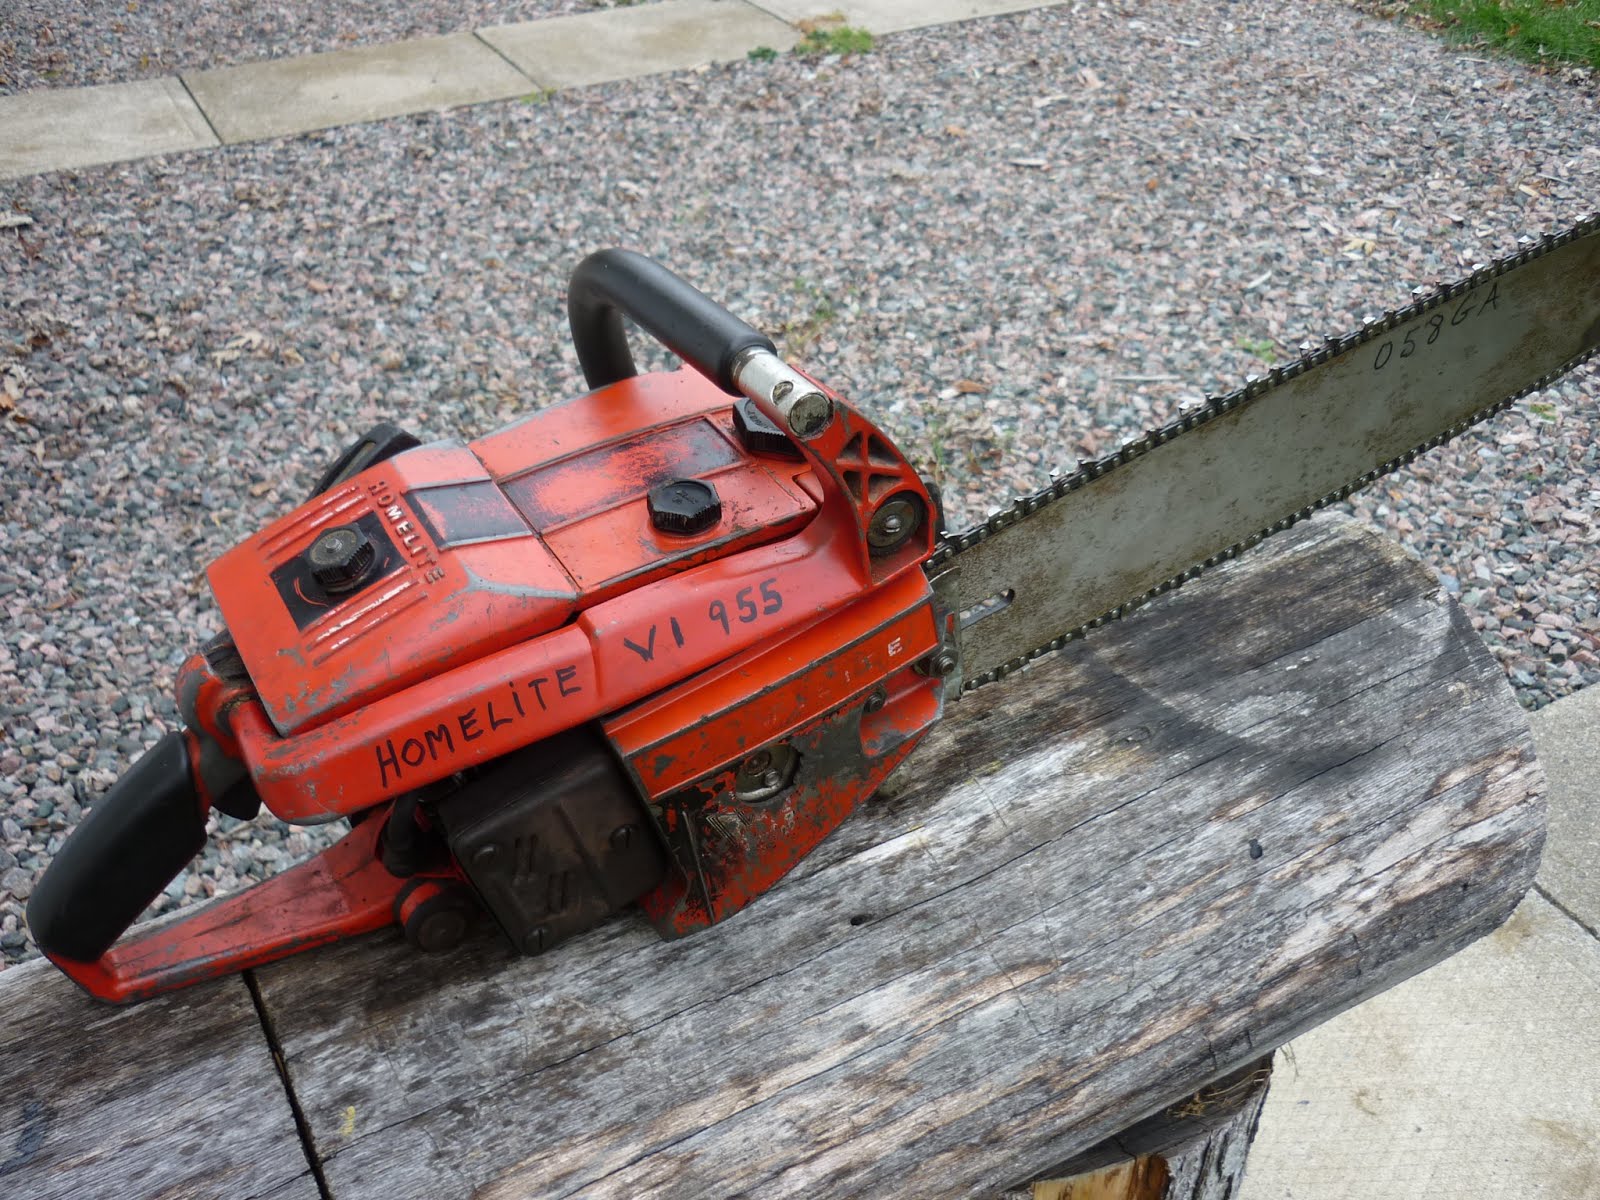 I have had for many years now a Homelite chainsaw(33cc) that I bought at